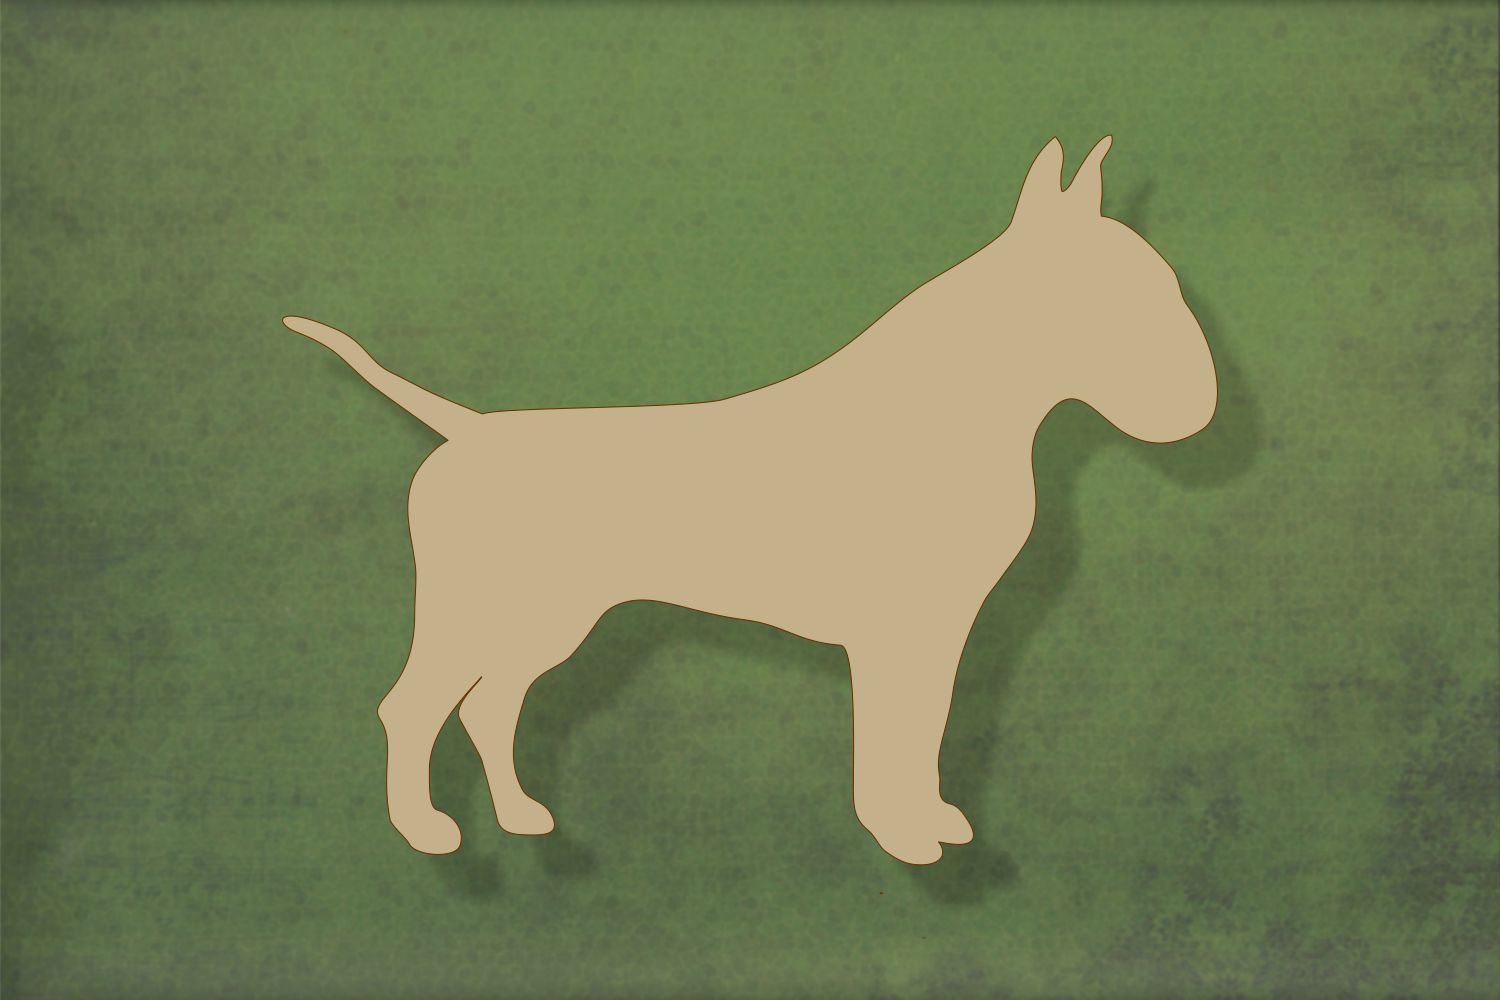 Laser cut, blank wooden English bull terrier shape for craft